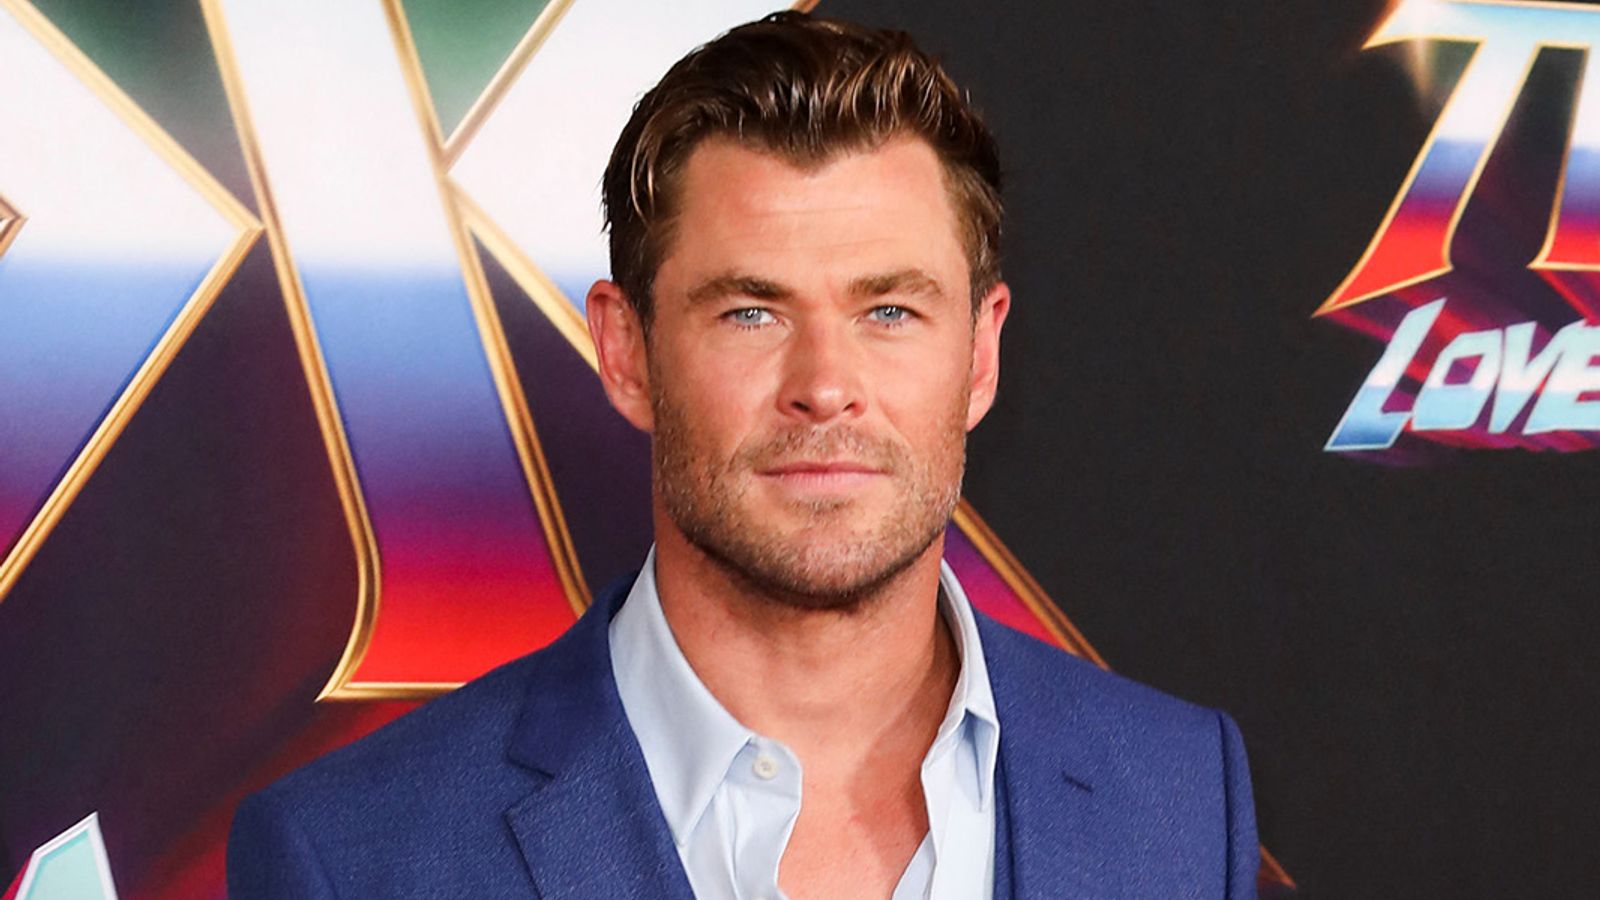 Chris Hemsworth to 'take a break' from acting following